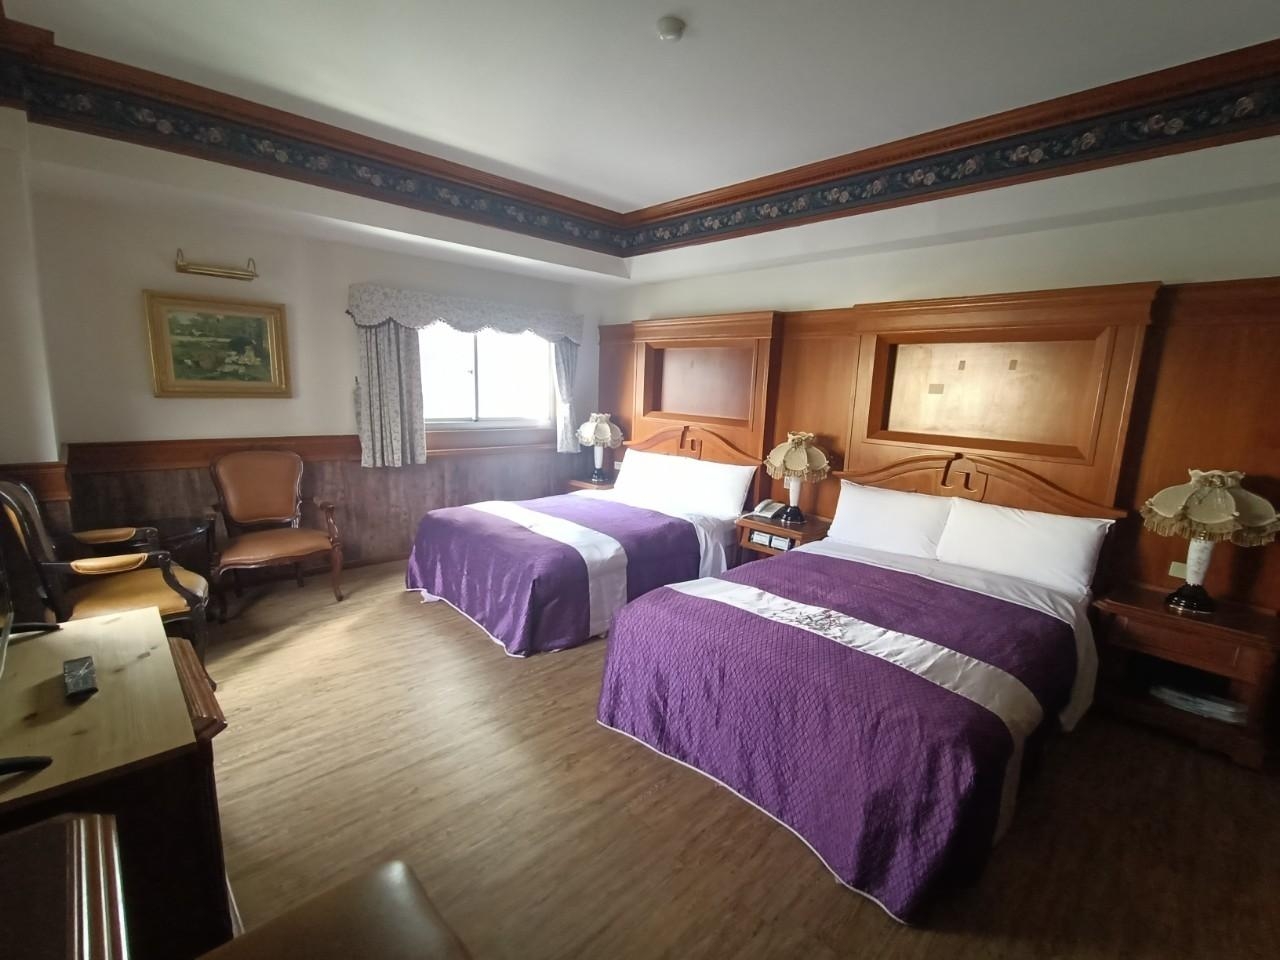 Green Seed Hotel-Linsen hall-Kaohsiung Updated 2022 Room Price-Reviews &  Deals | Trip.com